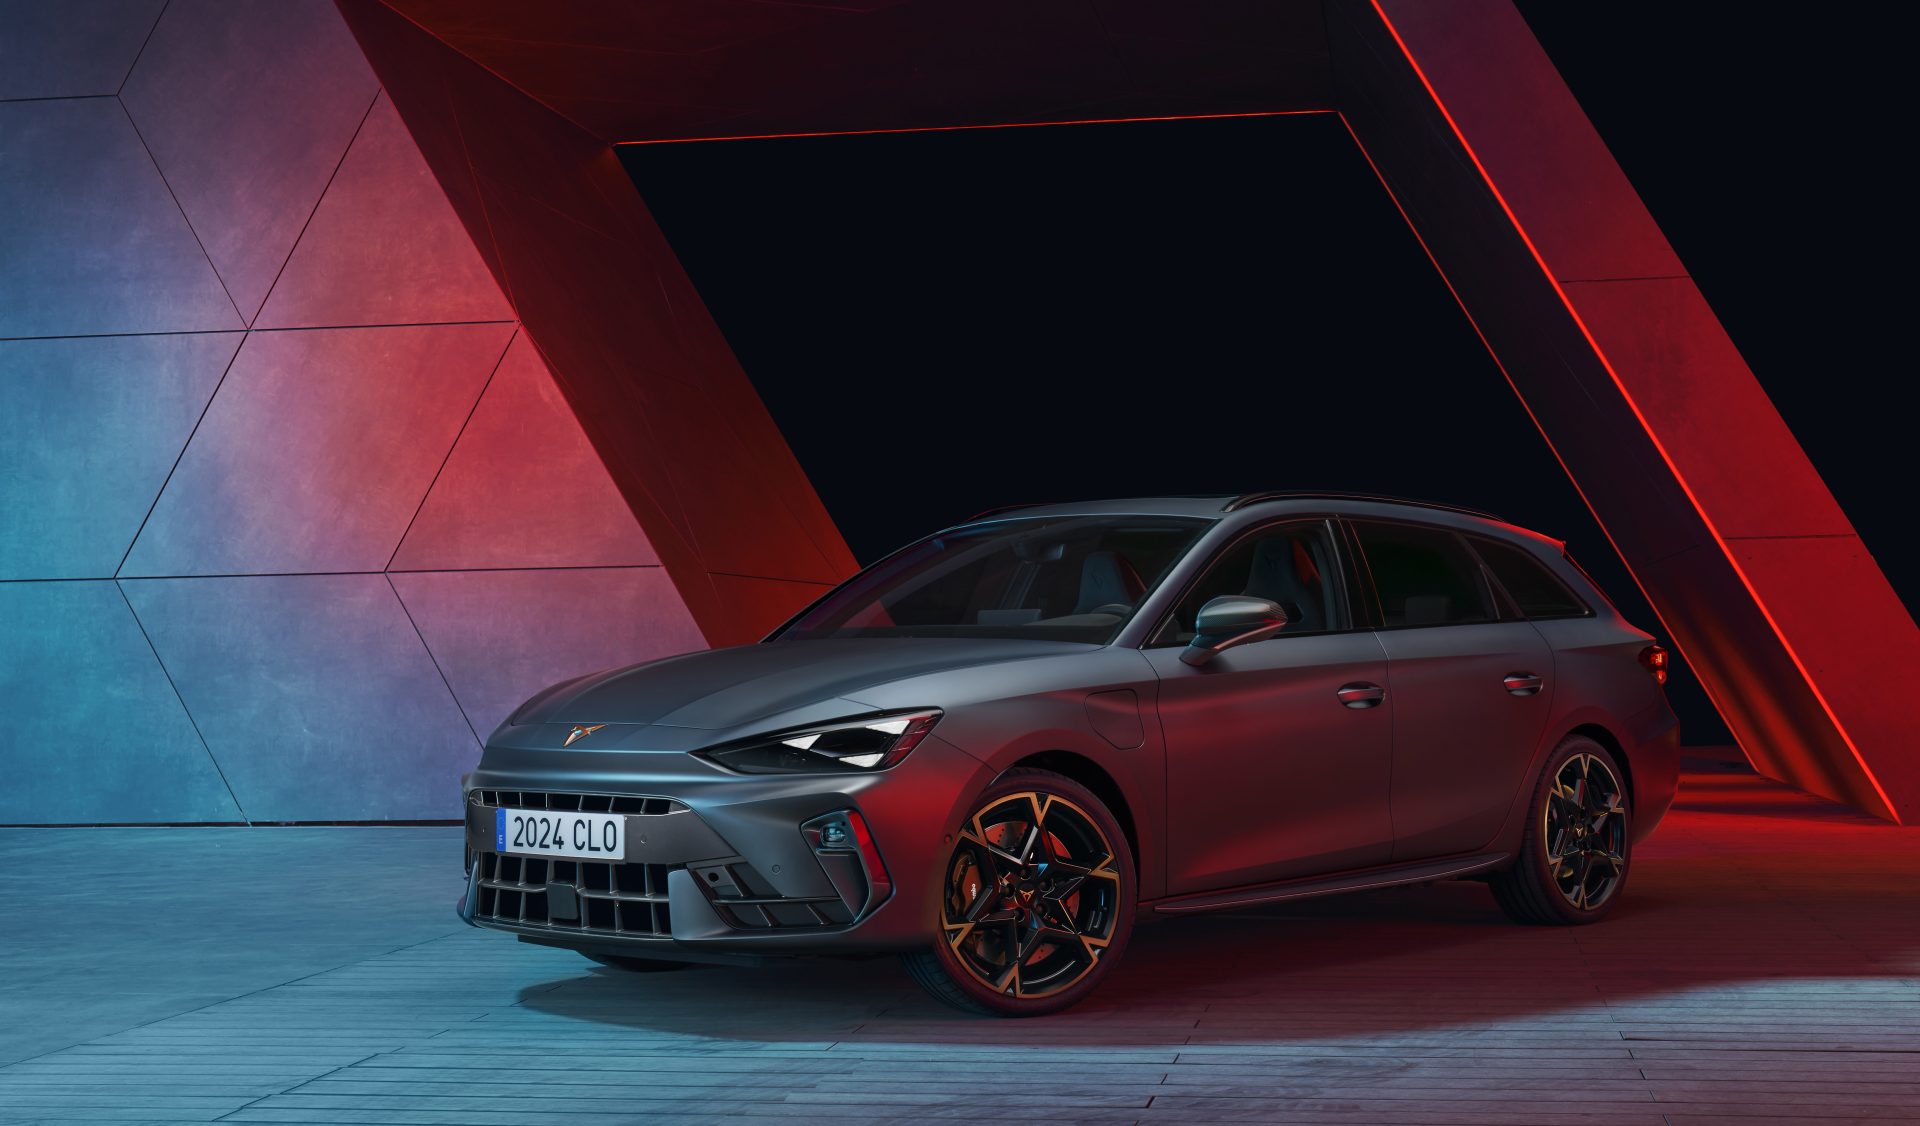 4010 CUPRALeonSportstourer What has changed in the new CUPRA Leon